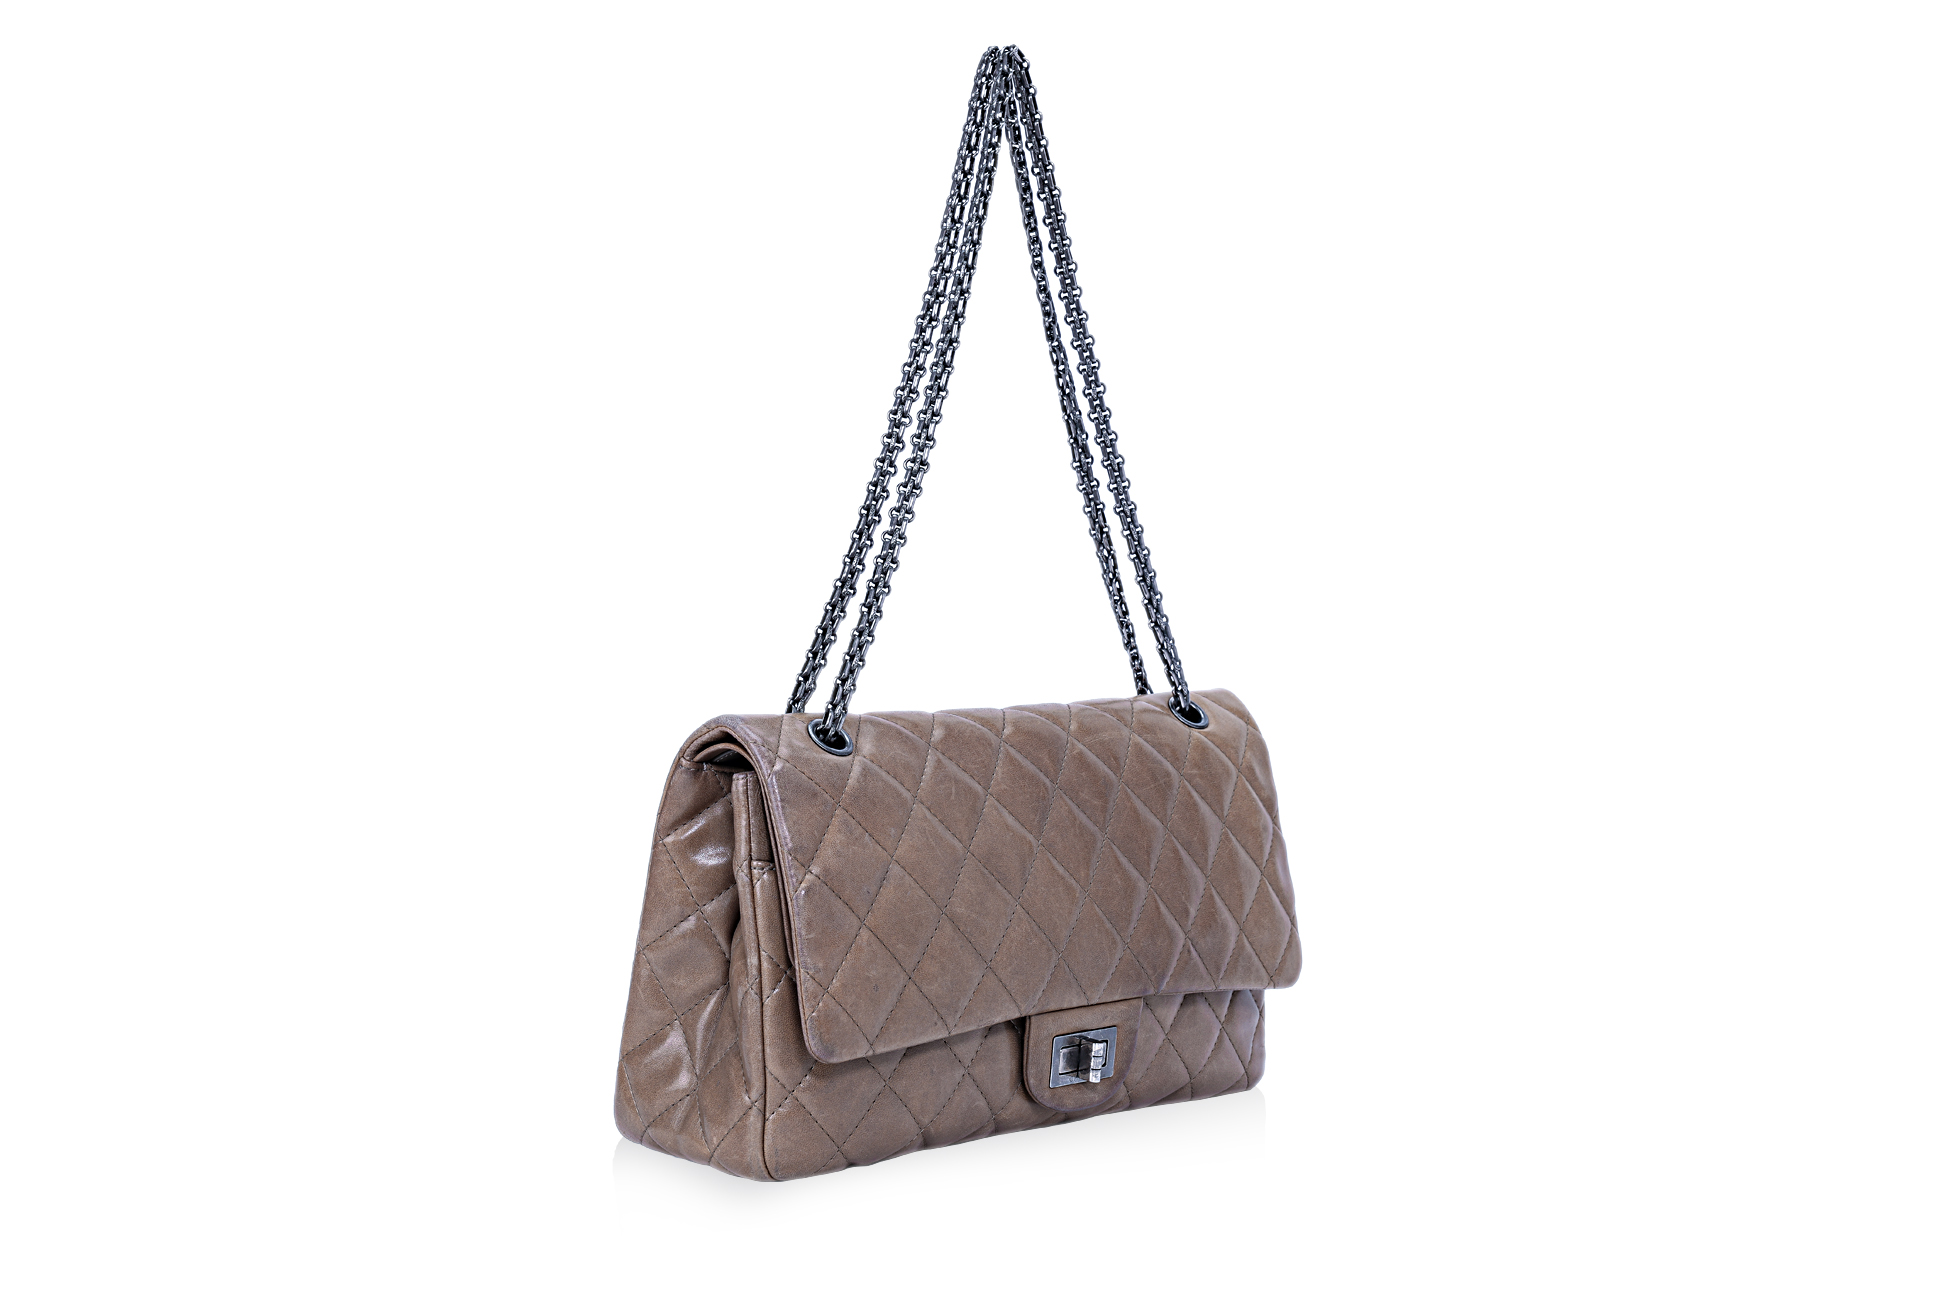 A CHANEL BROWN REISSUE 227 DOUBLE FLAP BAG - Image 2 of 4